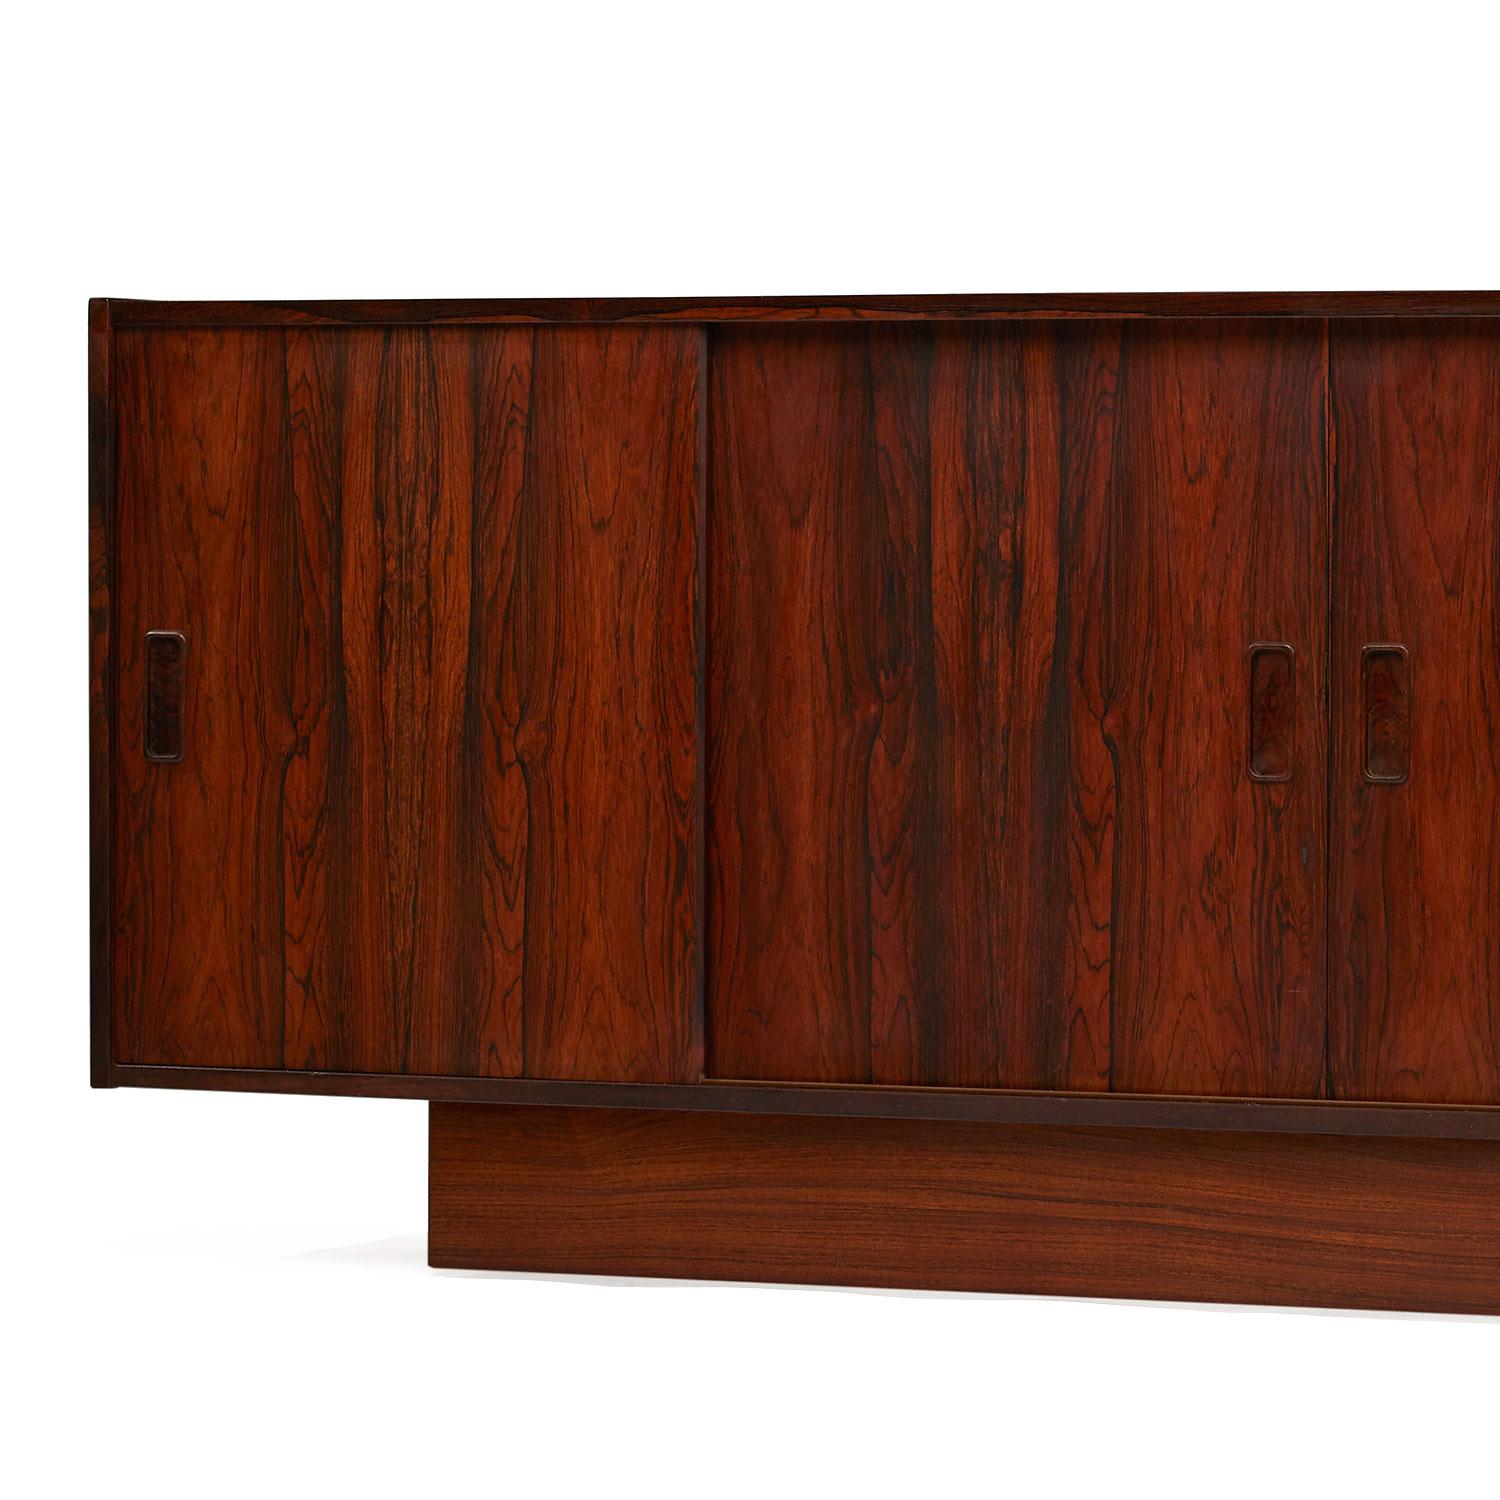 Expertly crafted vintage Danish rosewood credenza. The unit features convenient sliding doors that conceal cabinet space at left and right. An uncommon mix of drawers and cabinet space make this piece versatile. Use it as a dresser in the bedroom,